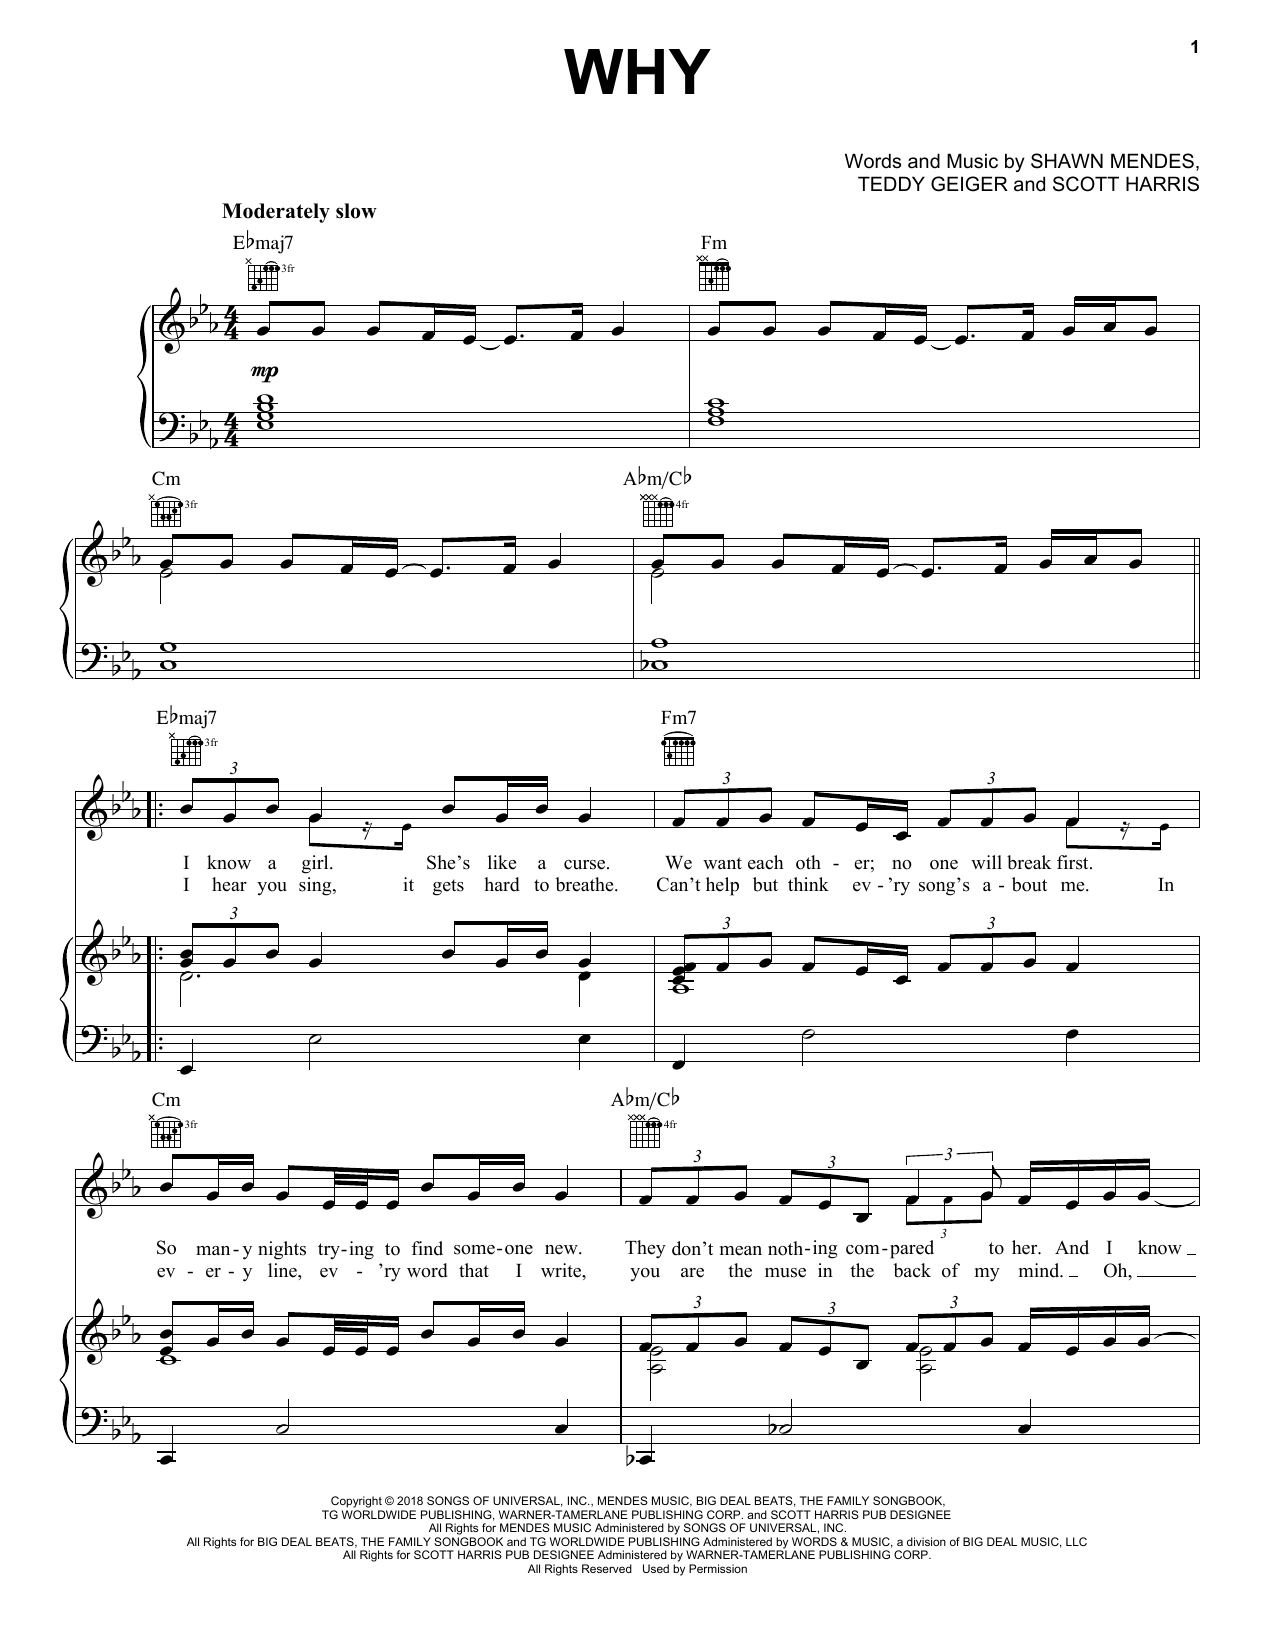 Download Shawn Mendes Why Sheet Music